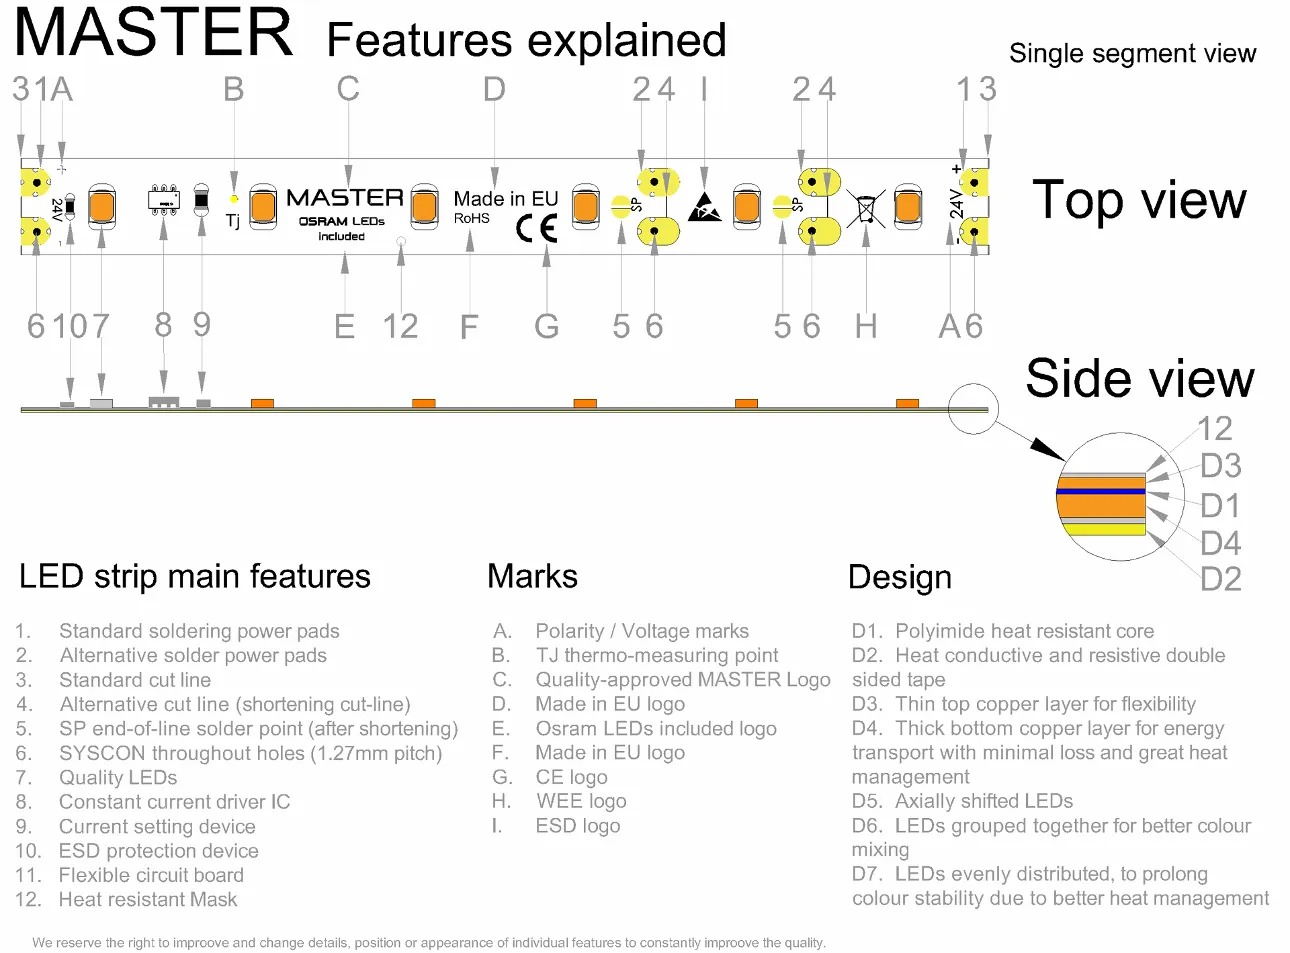 MASTER DECO LED strip segment drawing with all features explained